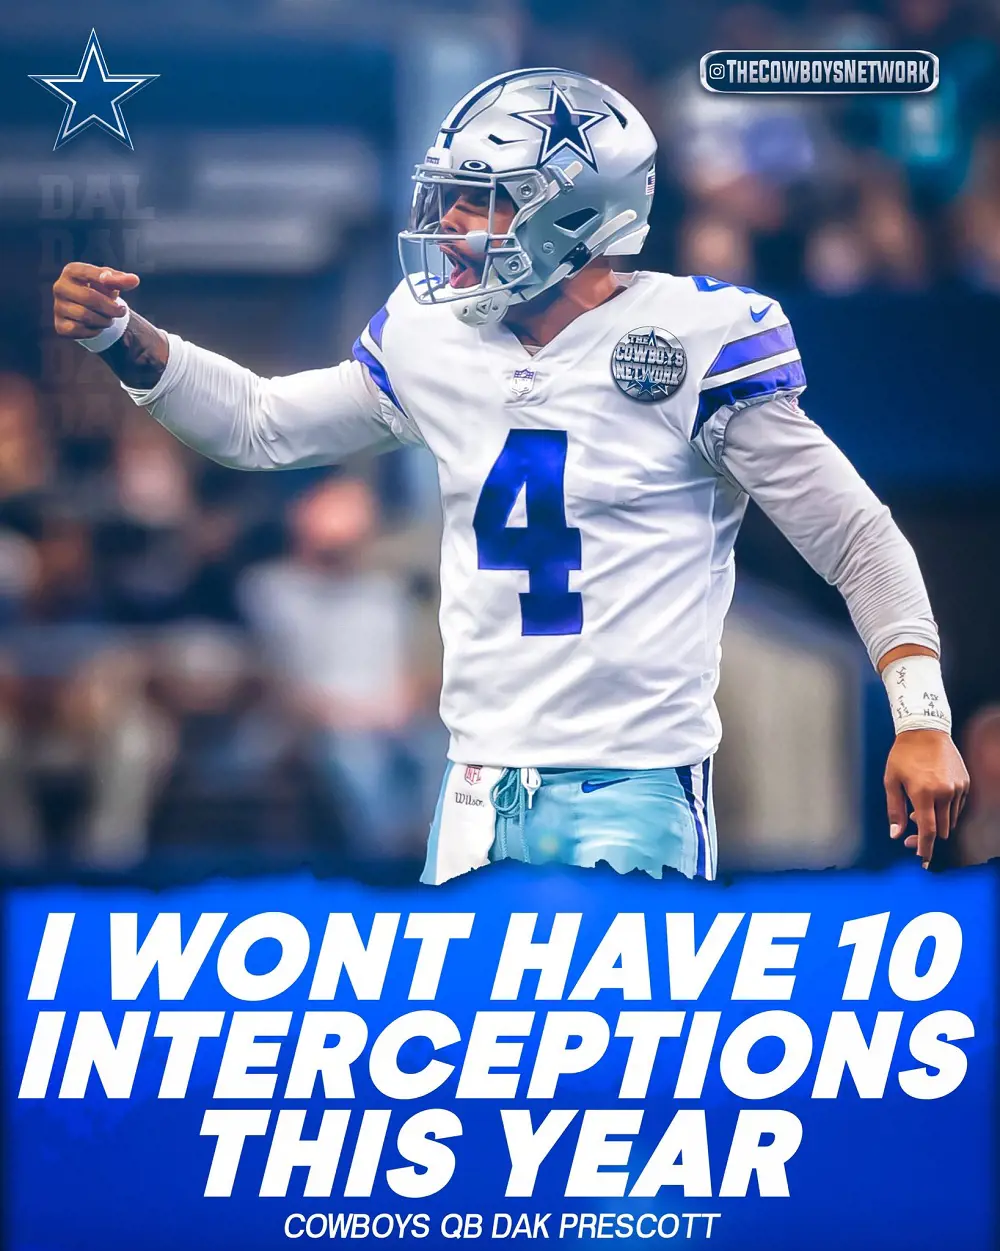 Dak Prescott has already made his intentions clear for the upcoming season